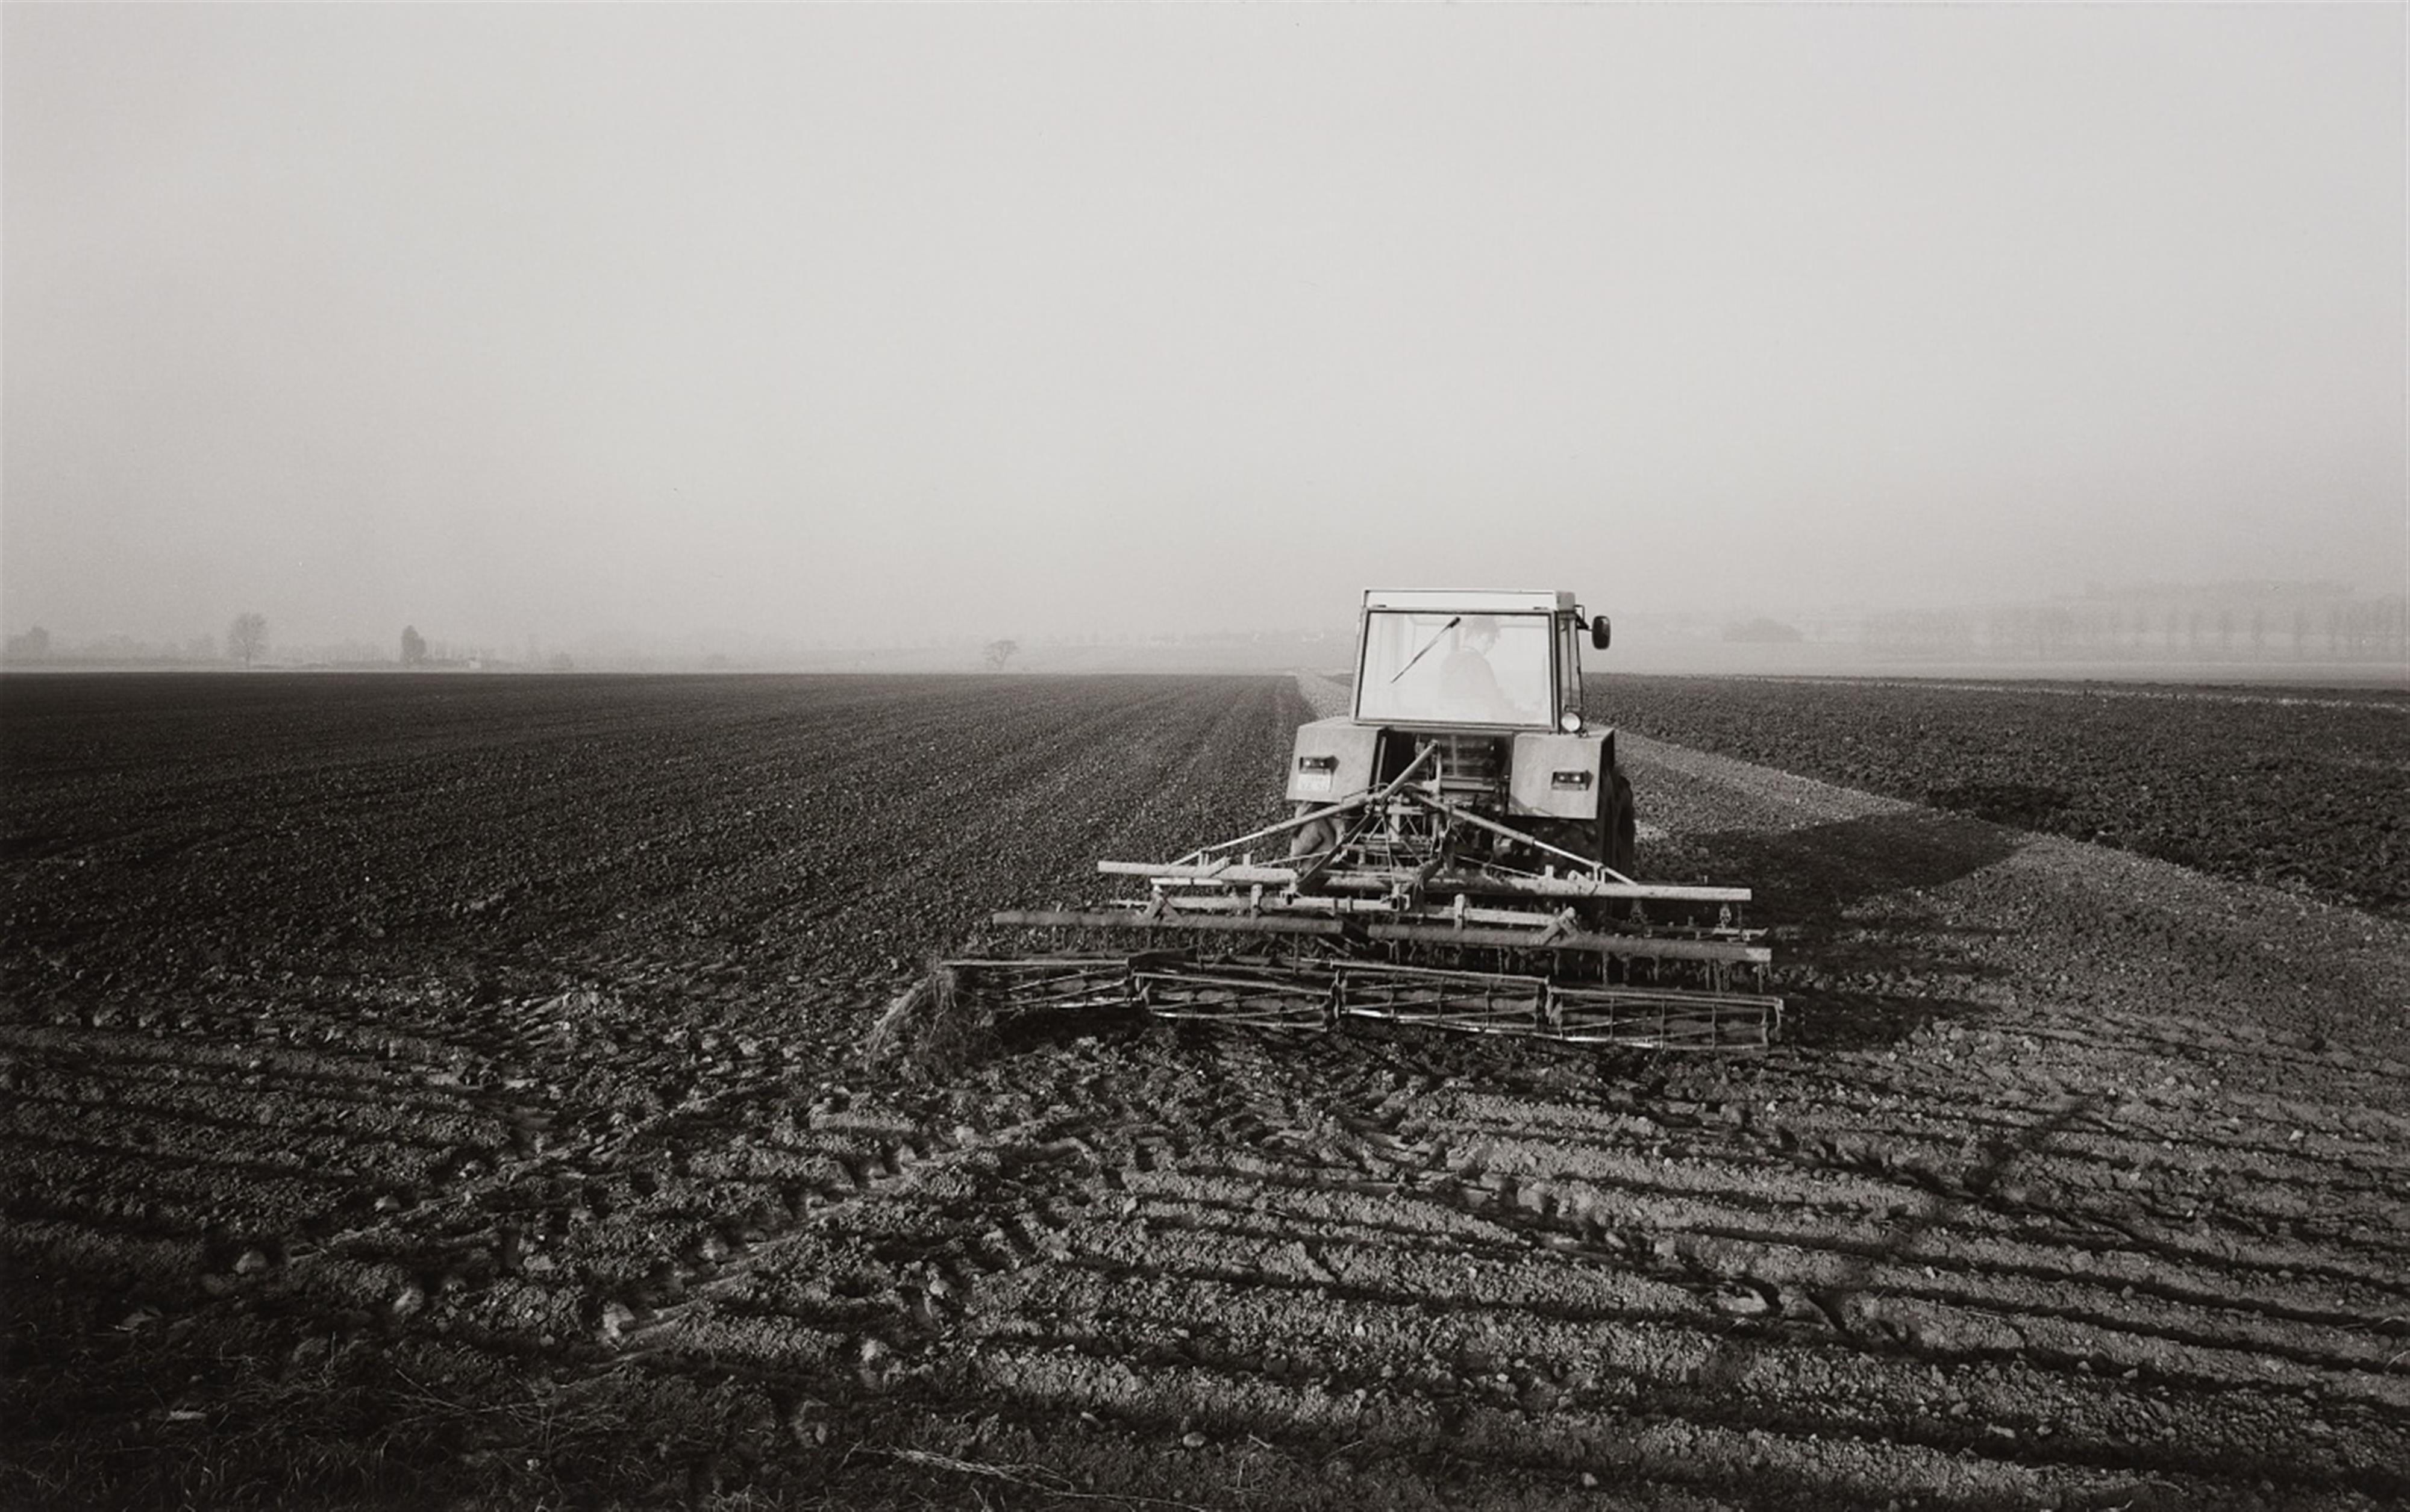 Heinrich Riebesehl - Untitled (from the series: Agrarlandschaften) - image-5